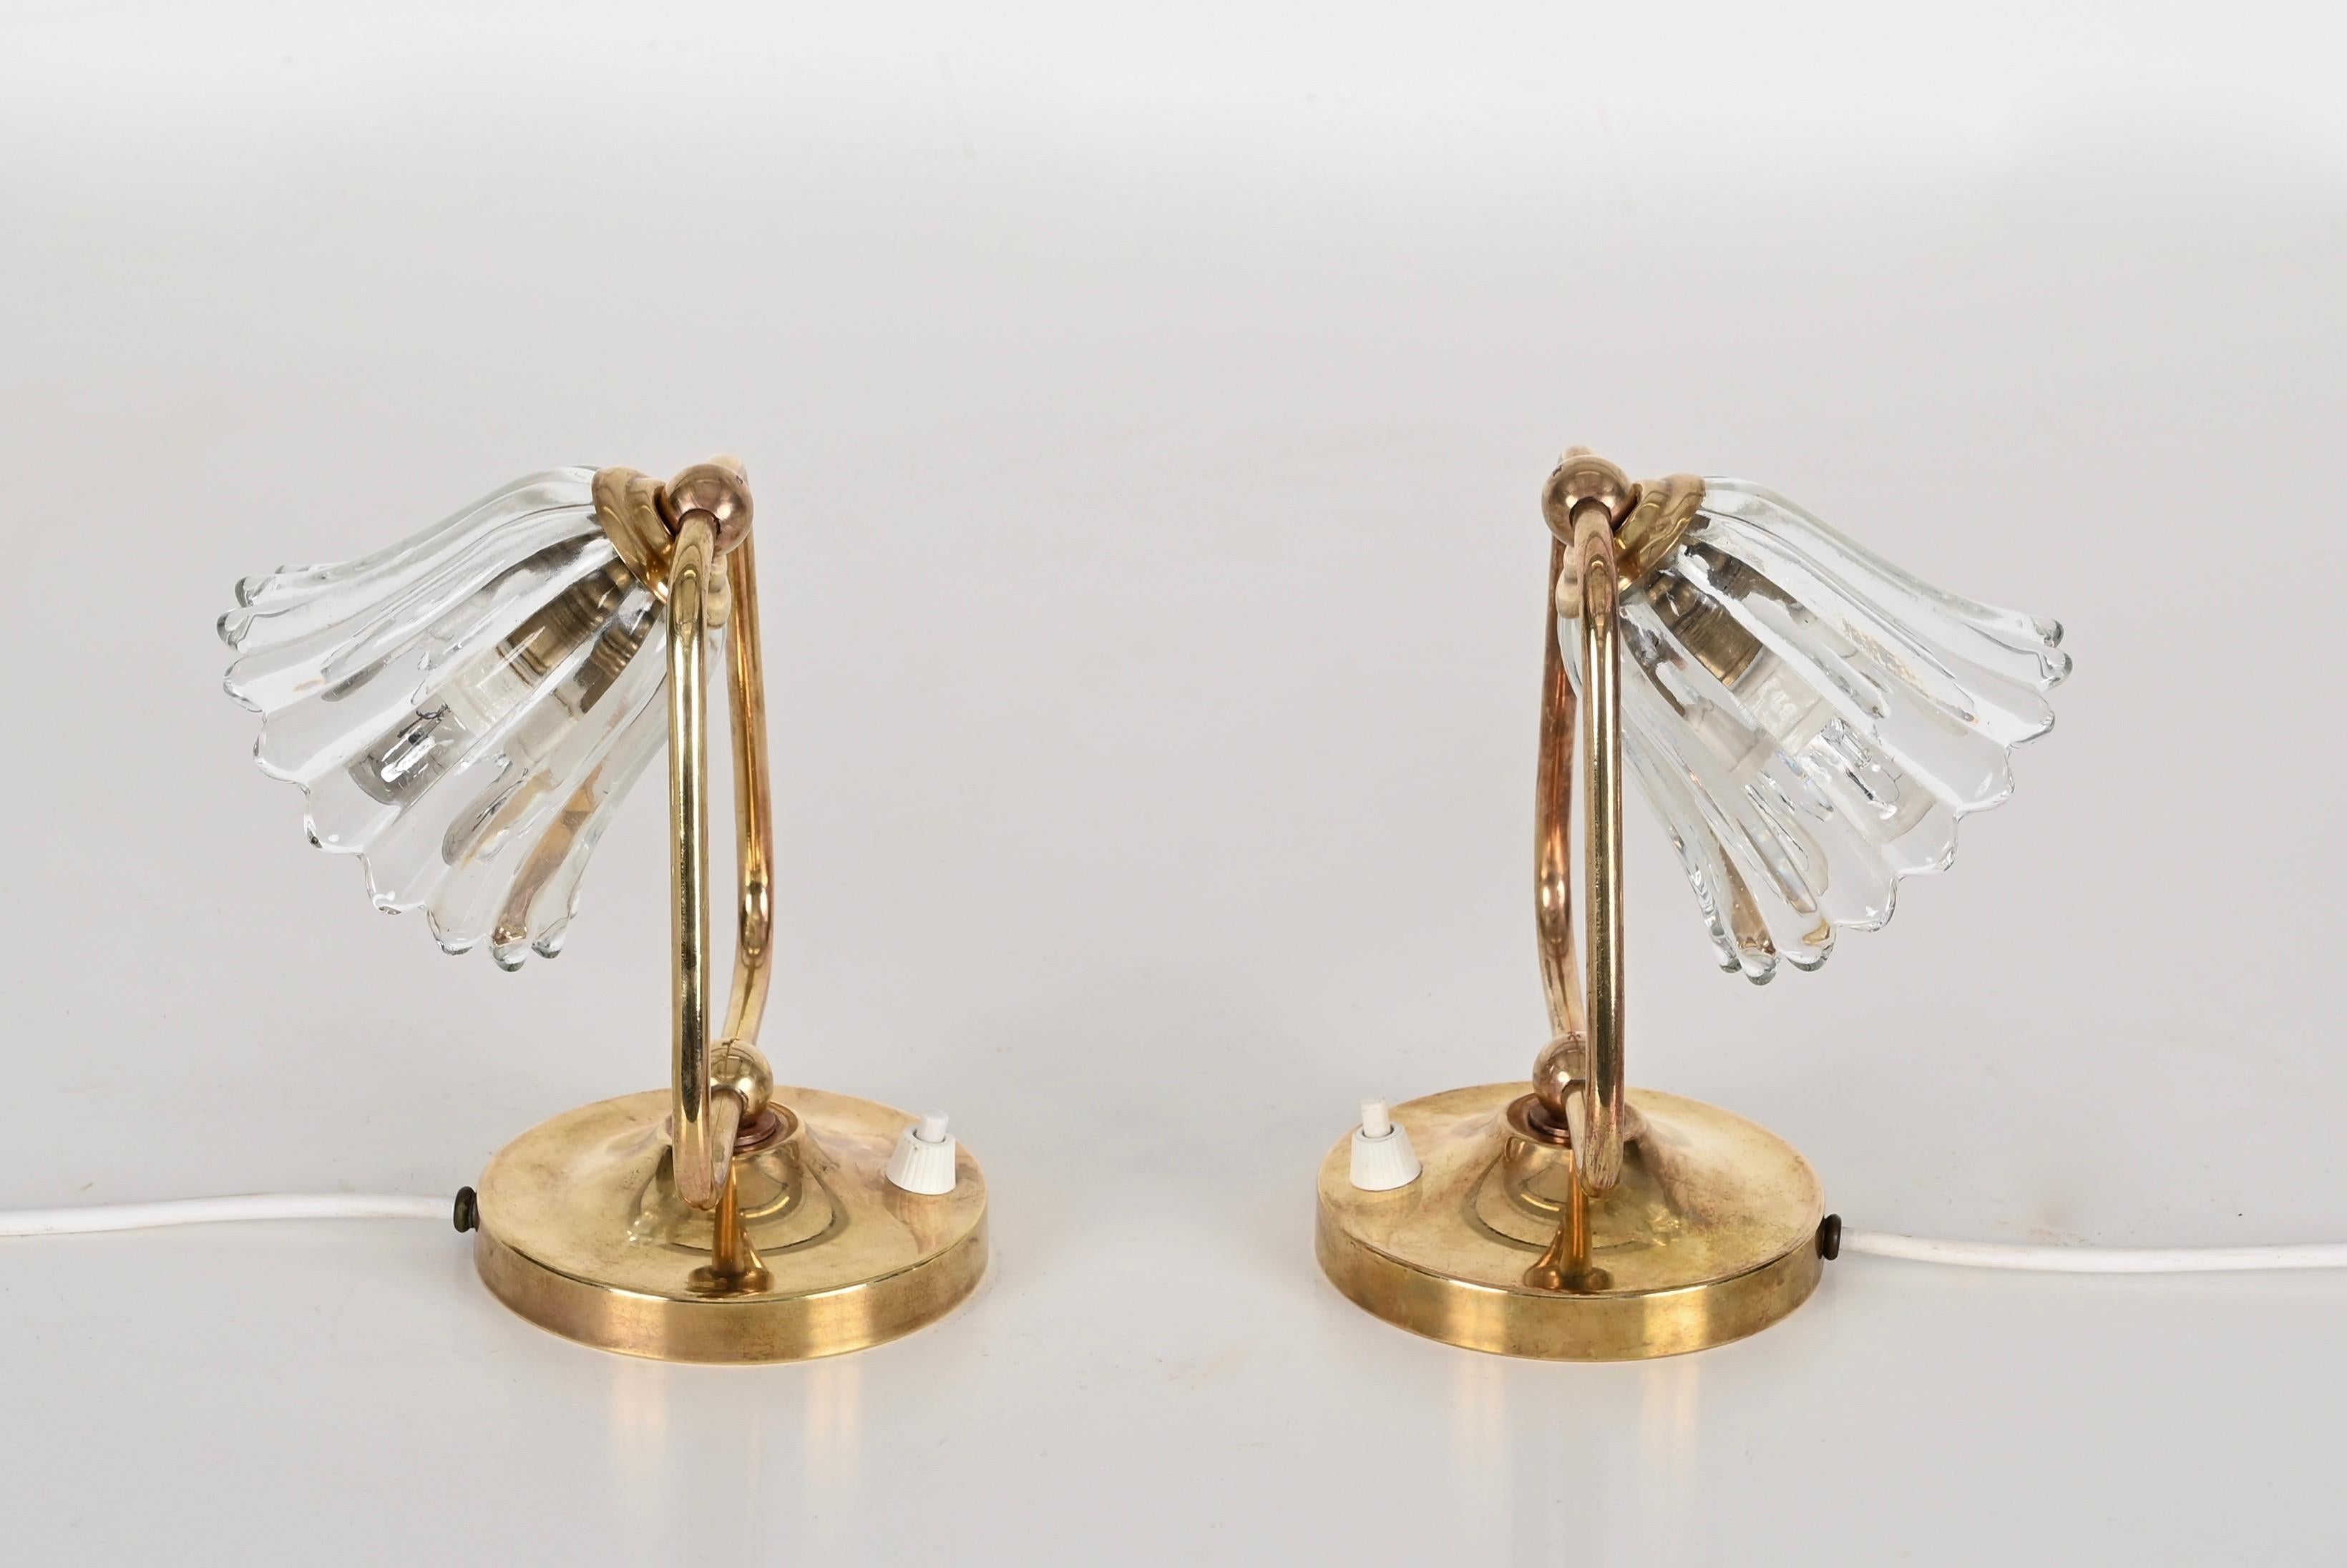 20th Century Pair of Murano Glass and Brass Bell Table Lamps by Barovier, Italy, 1940s For Sale